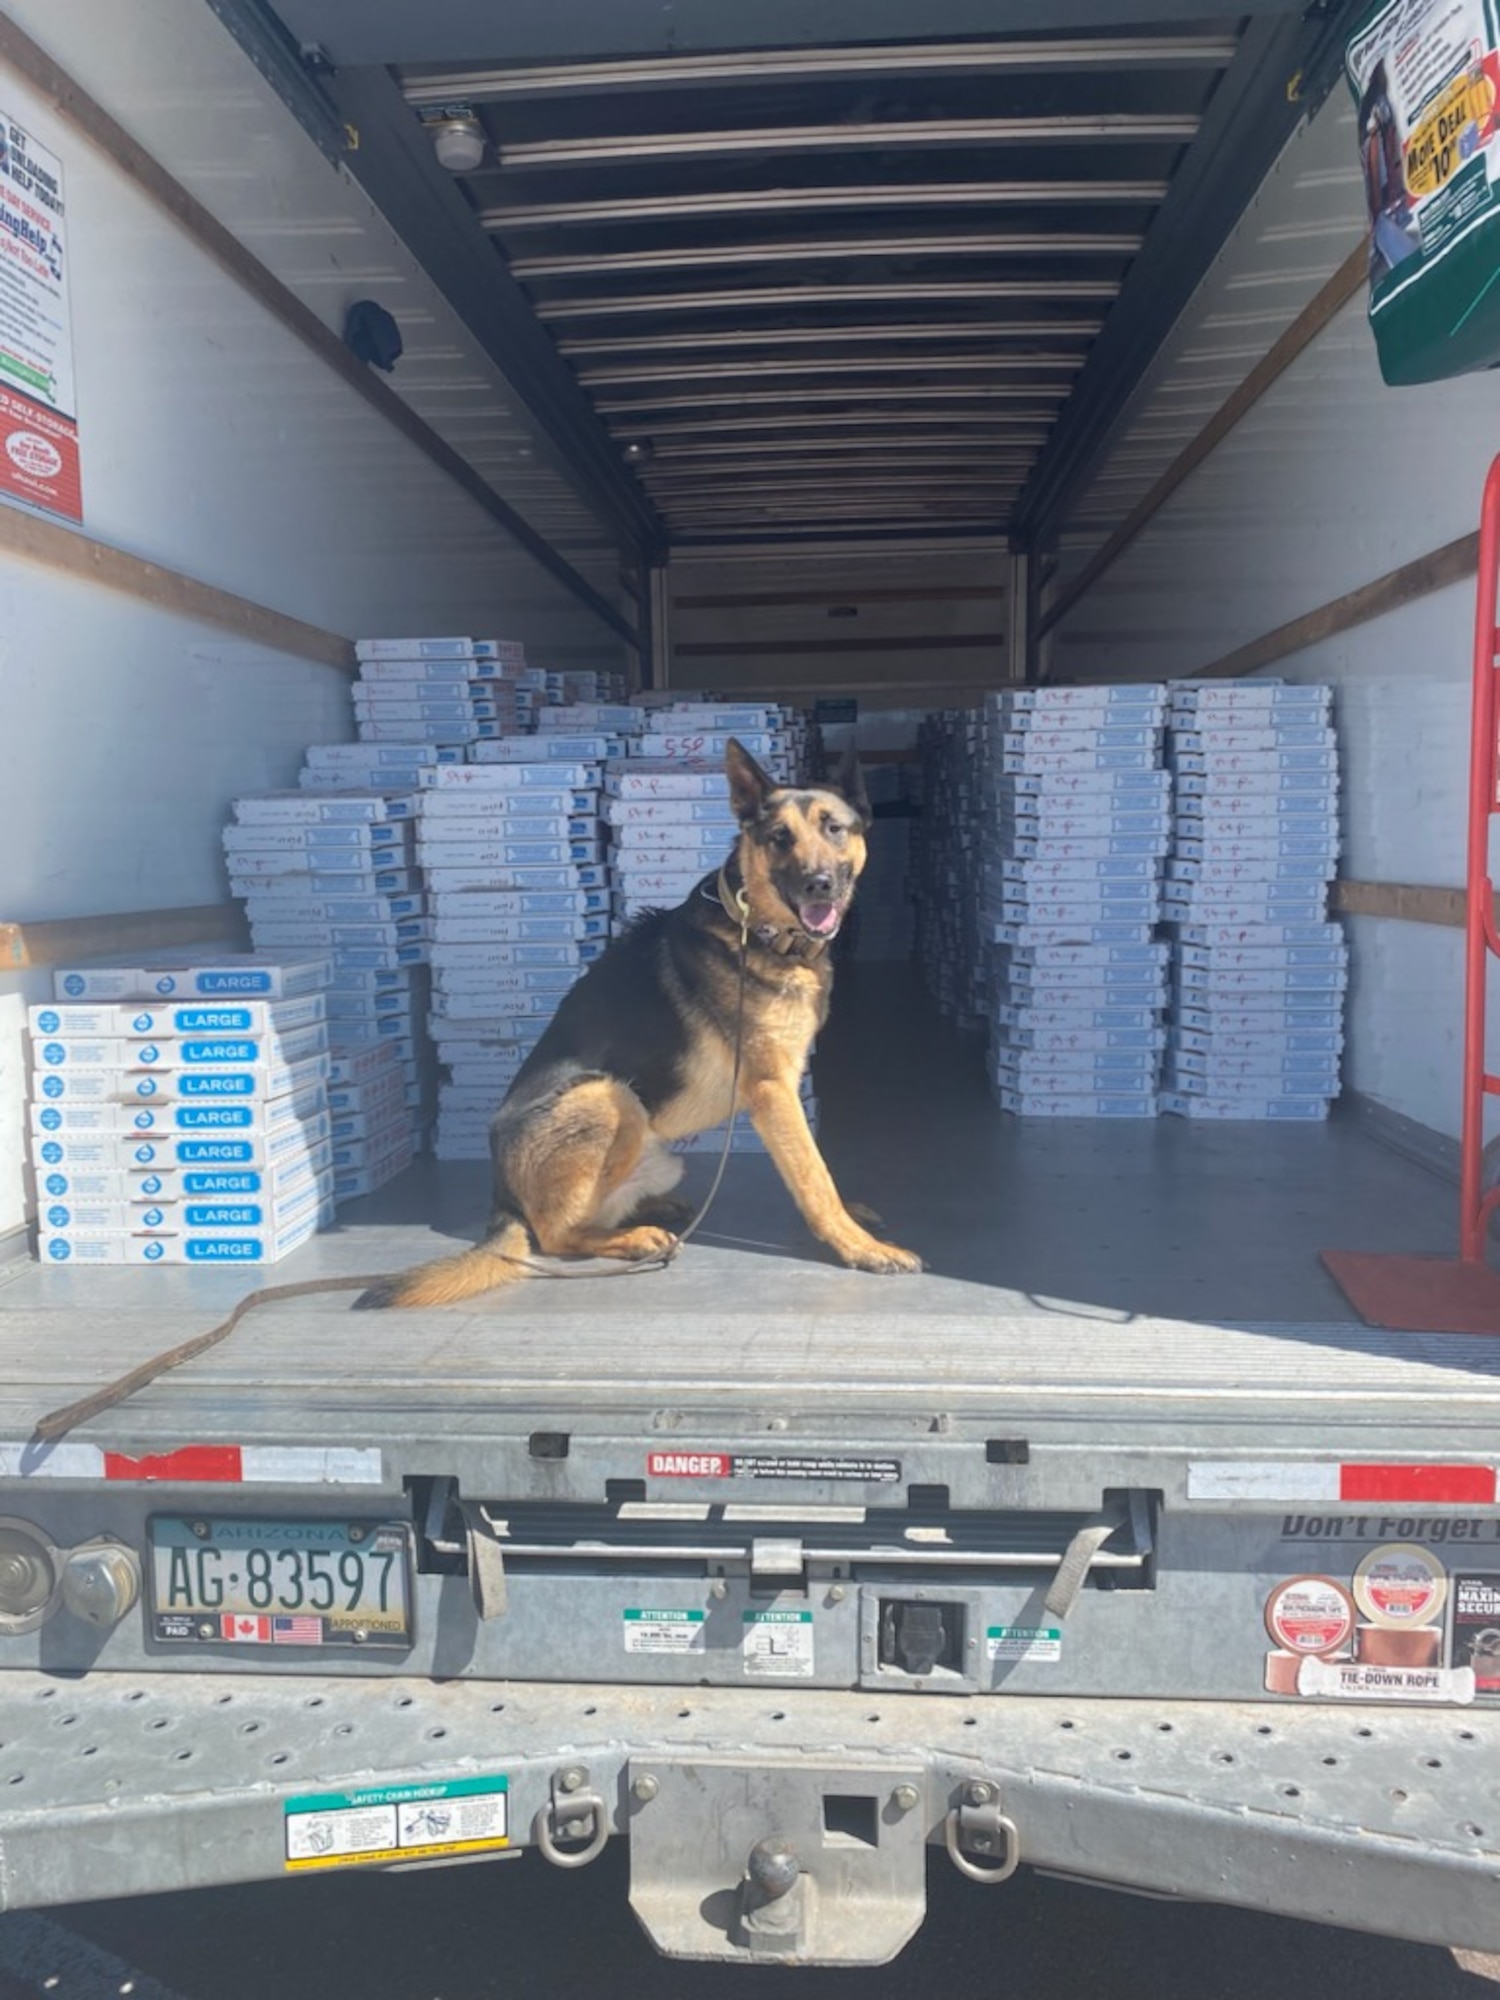 K9 in the back of a truck.